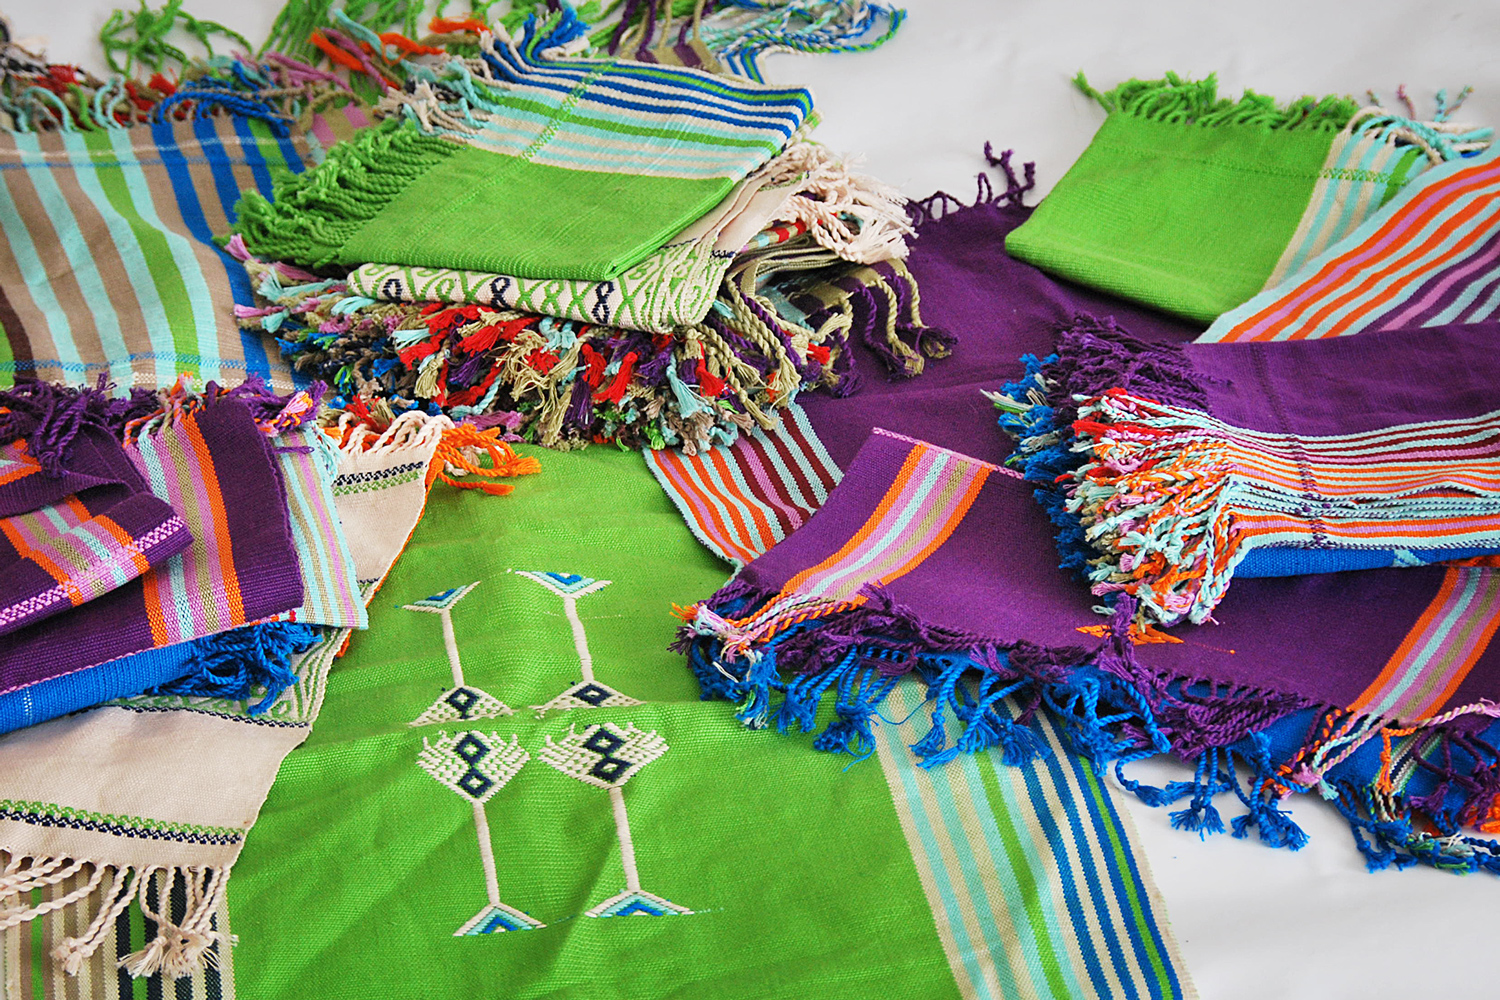 Prototypes of all objects made with the floor and waist loom techniques